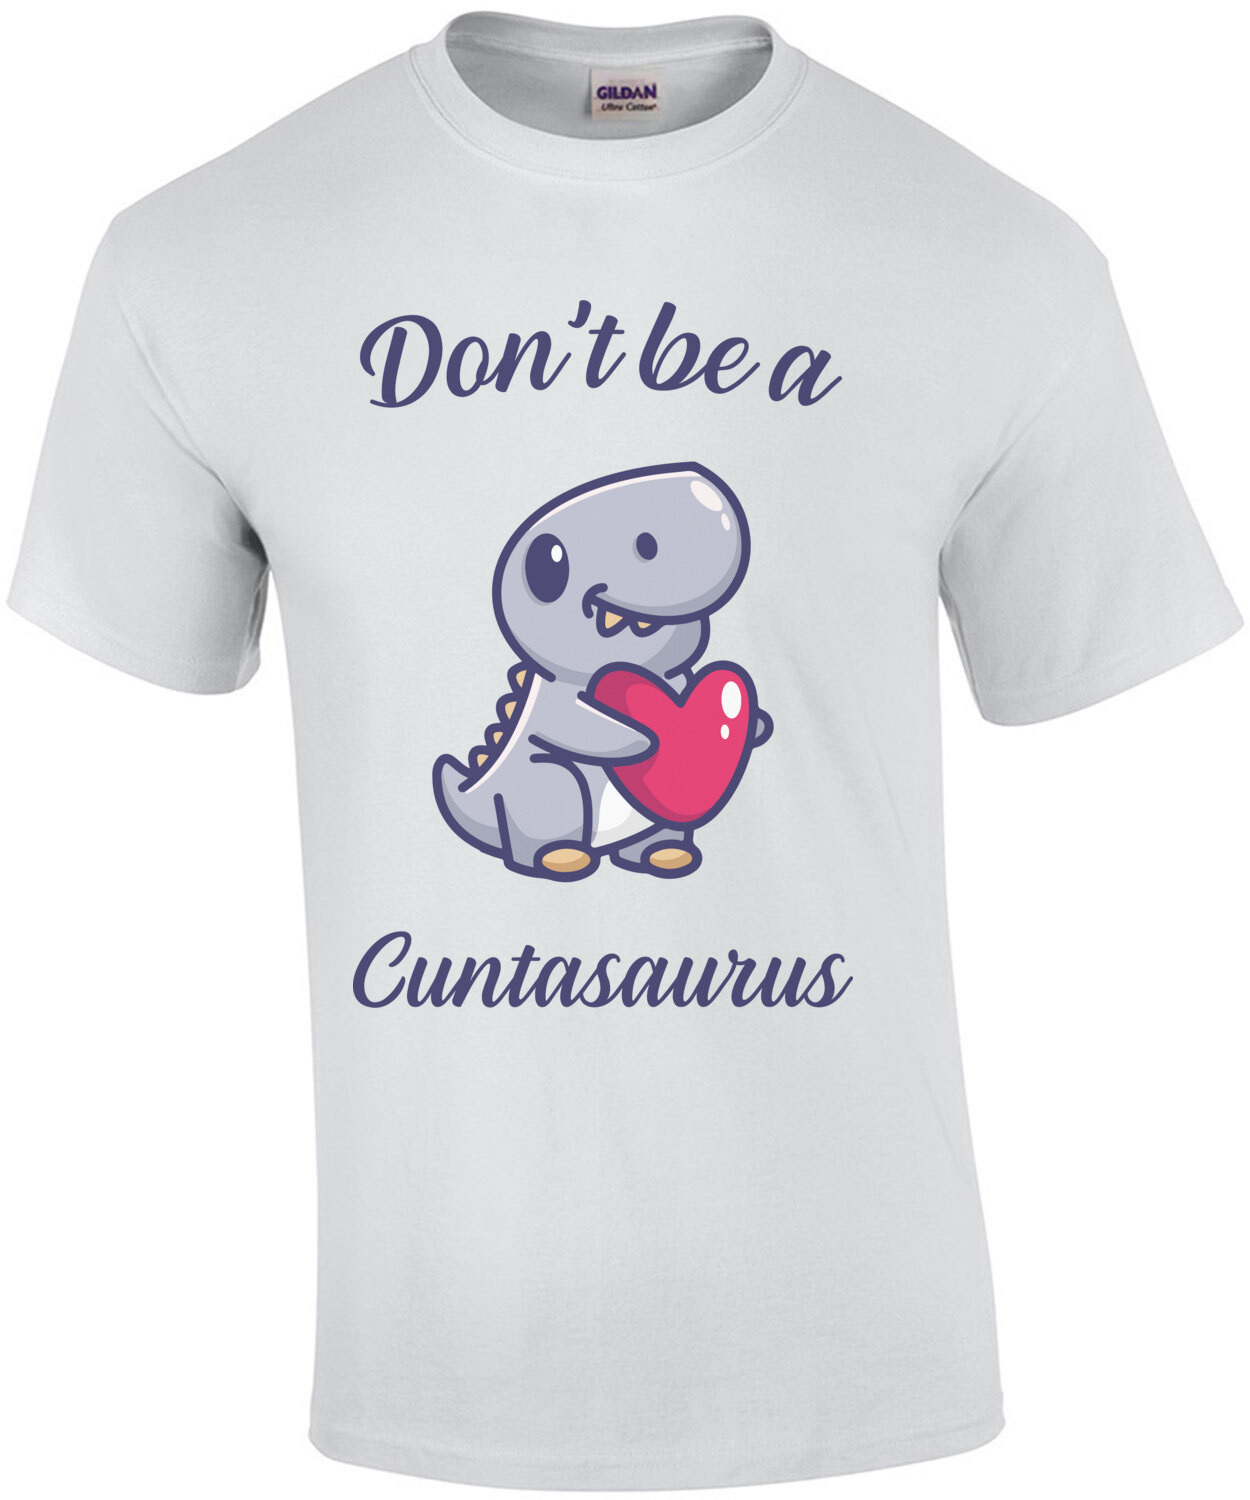 Don't Be a Cuntasaurus - funny t-shirt